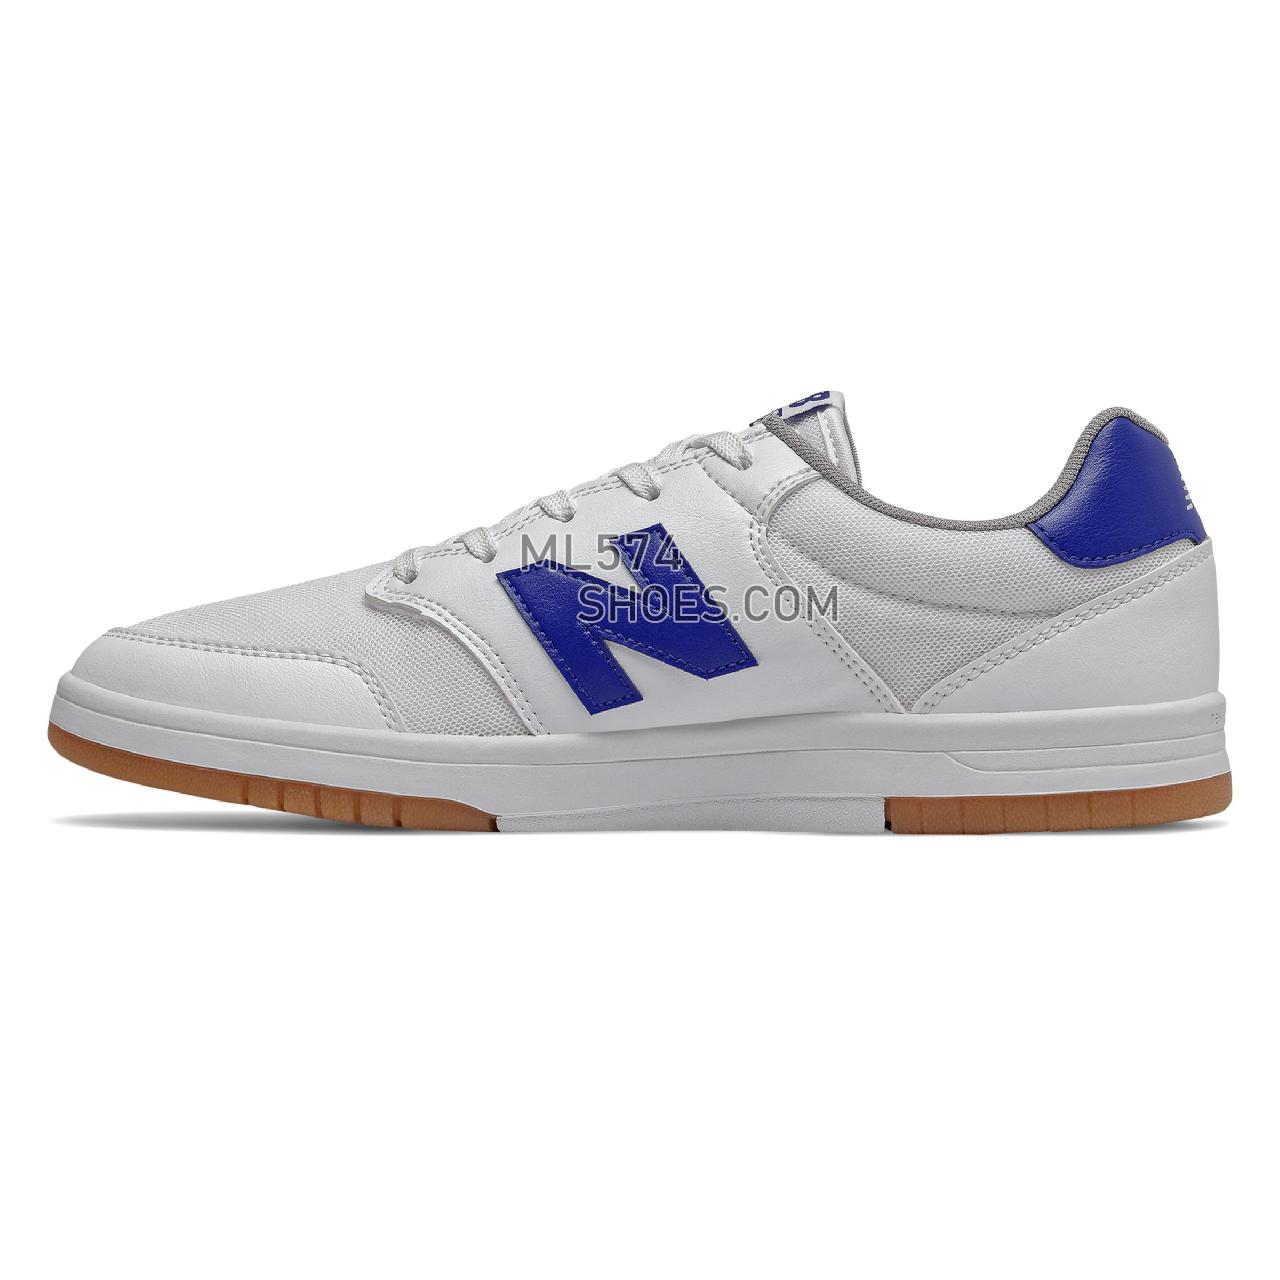 New Balance All Coasts 425 - Men's Court Classics - White with Royal Blue - AM425WHB